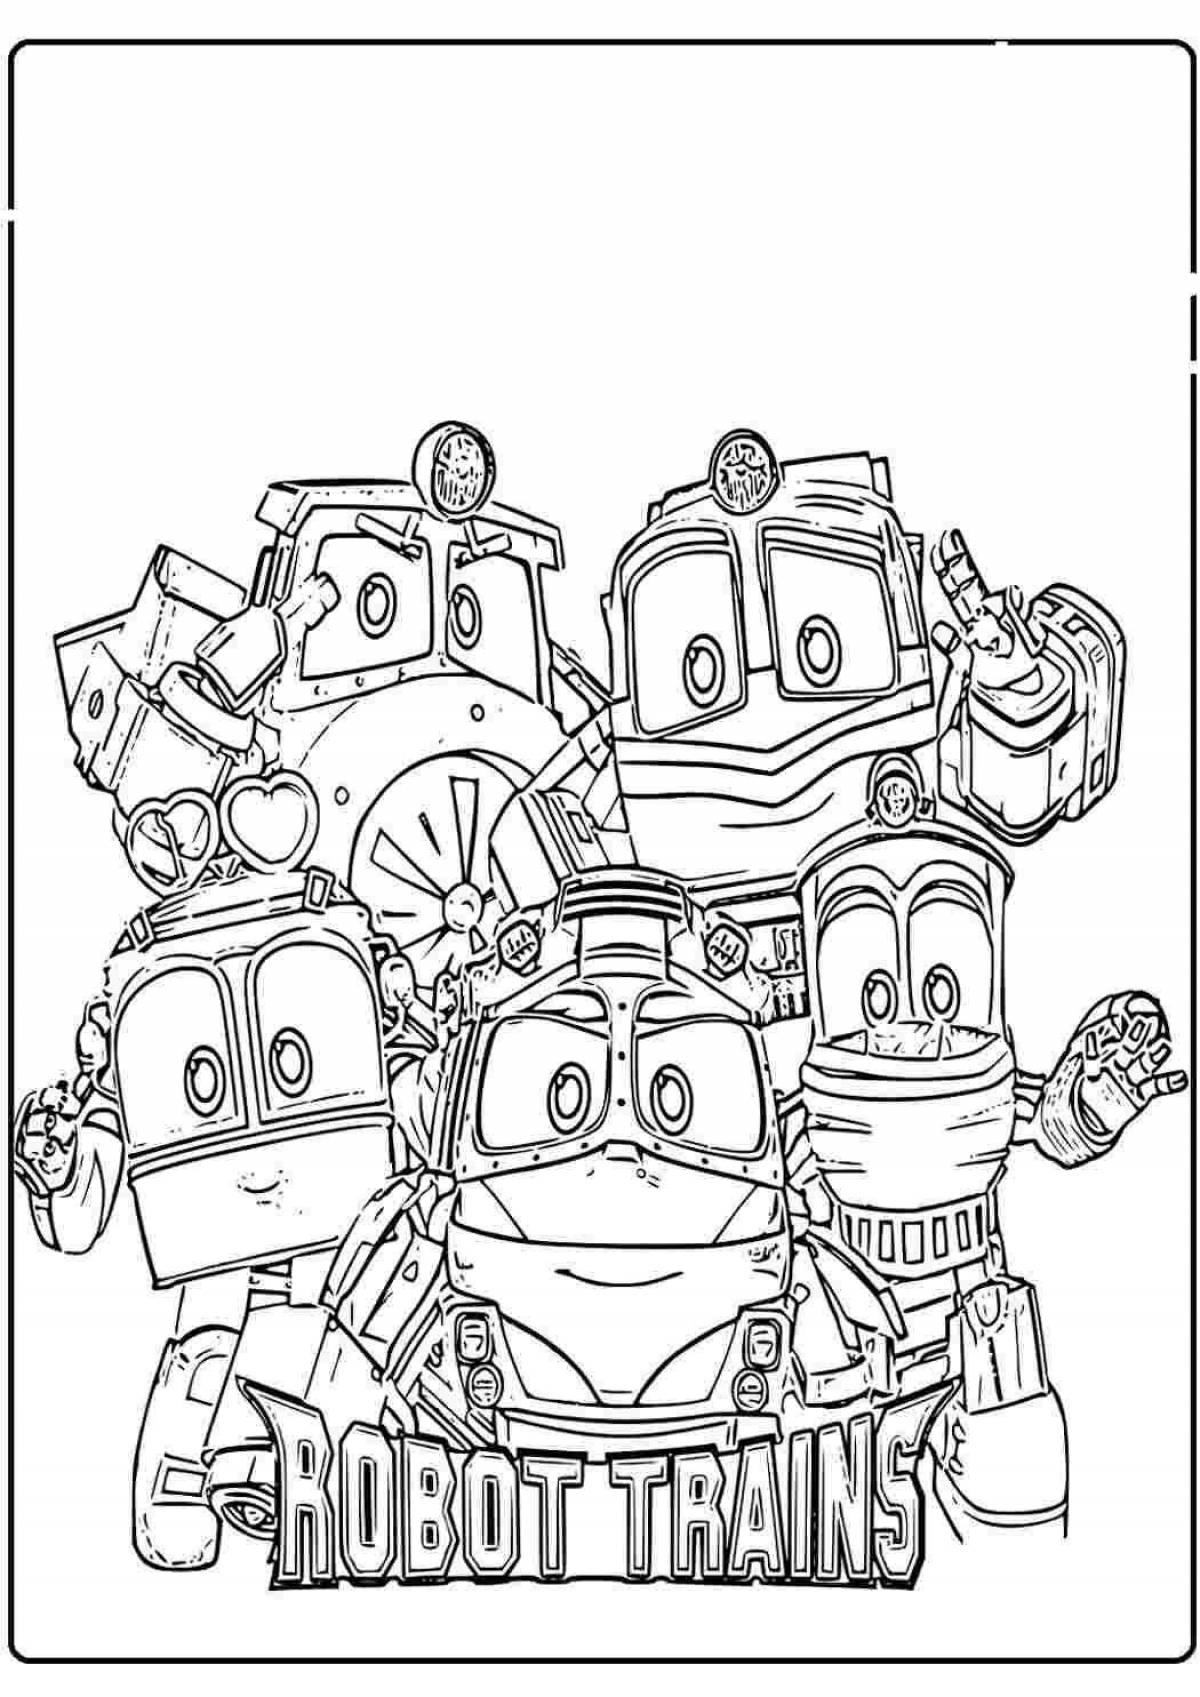 Coloring book colorful robot trains maxi